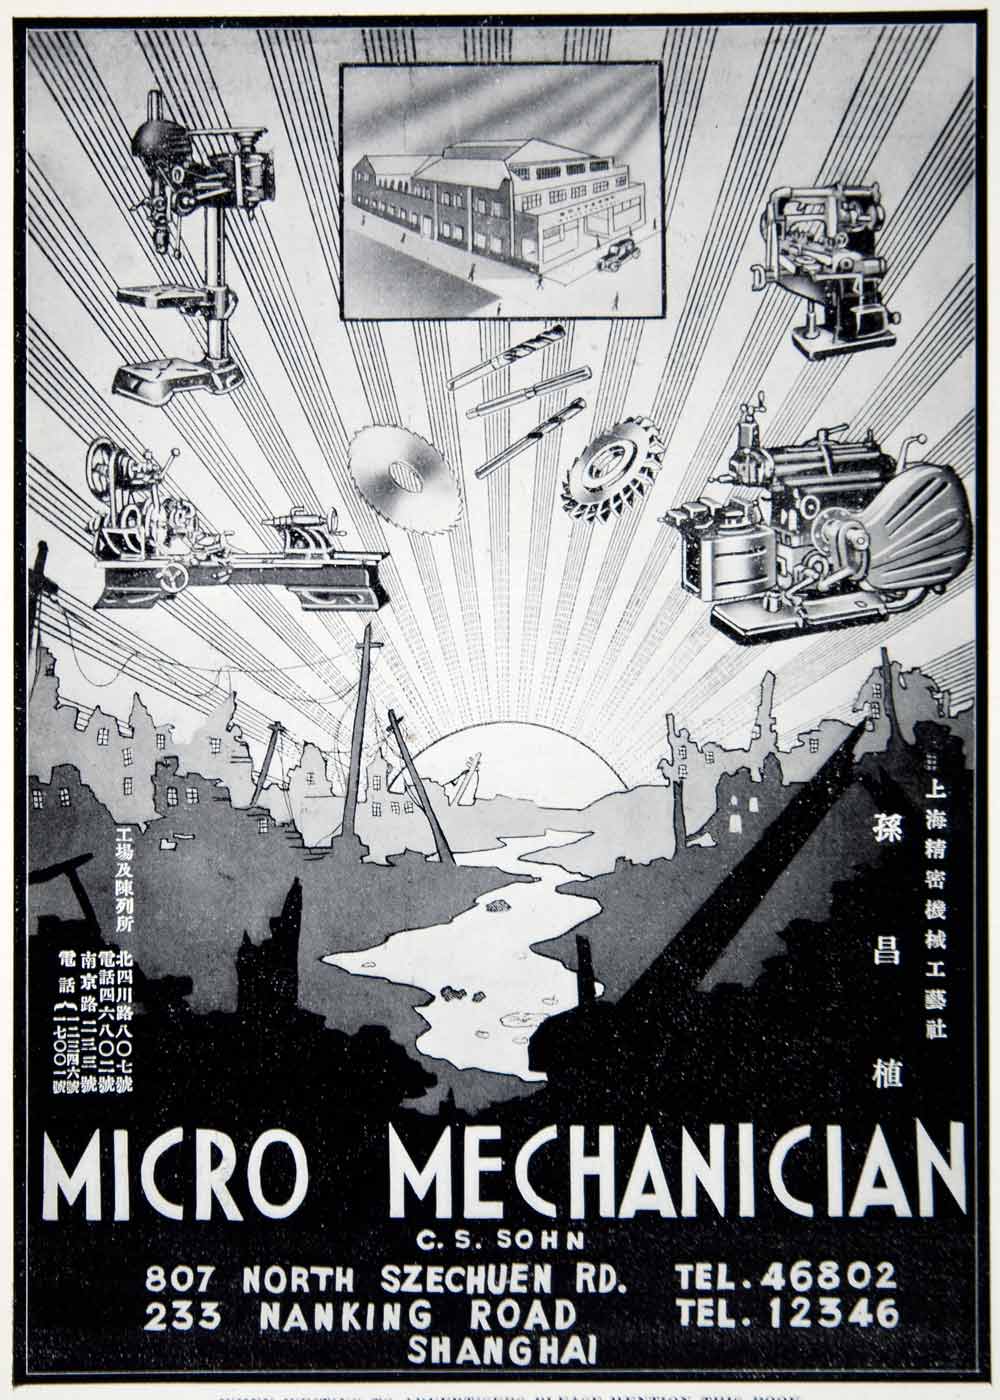 1940 Ad Micro Mechanician Shanghai China Industrial Manufacturing Products GOE1